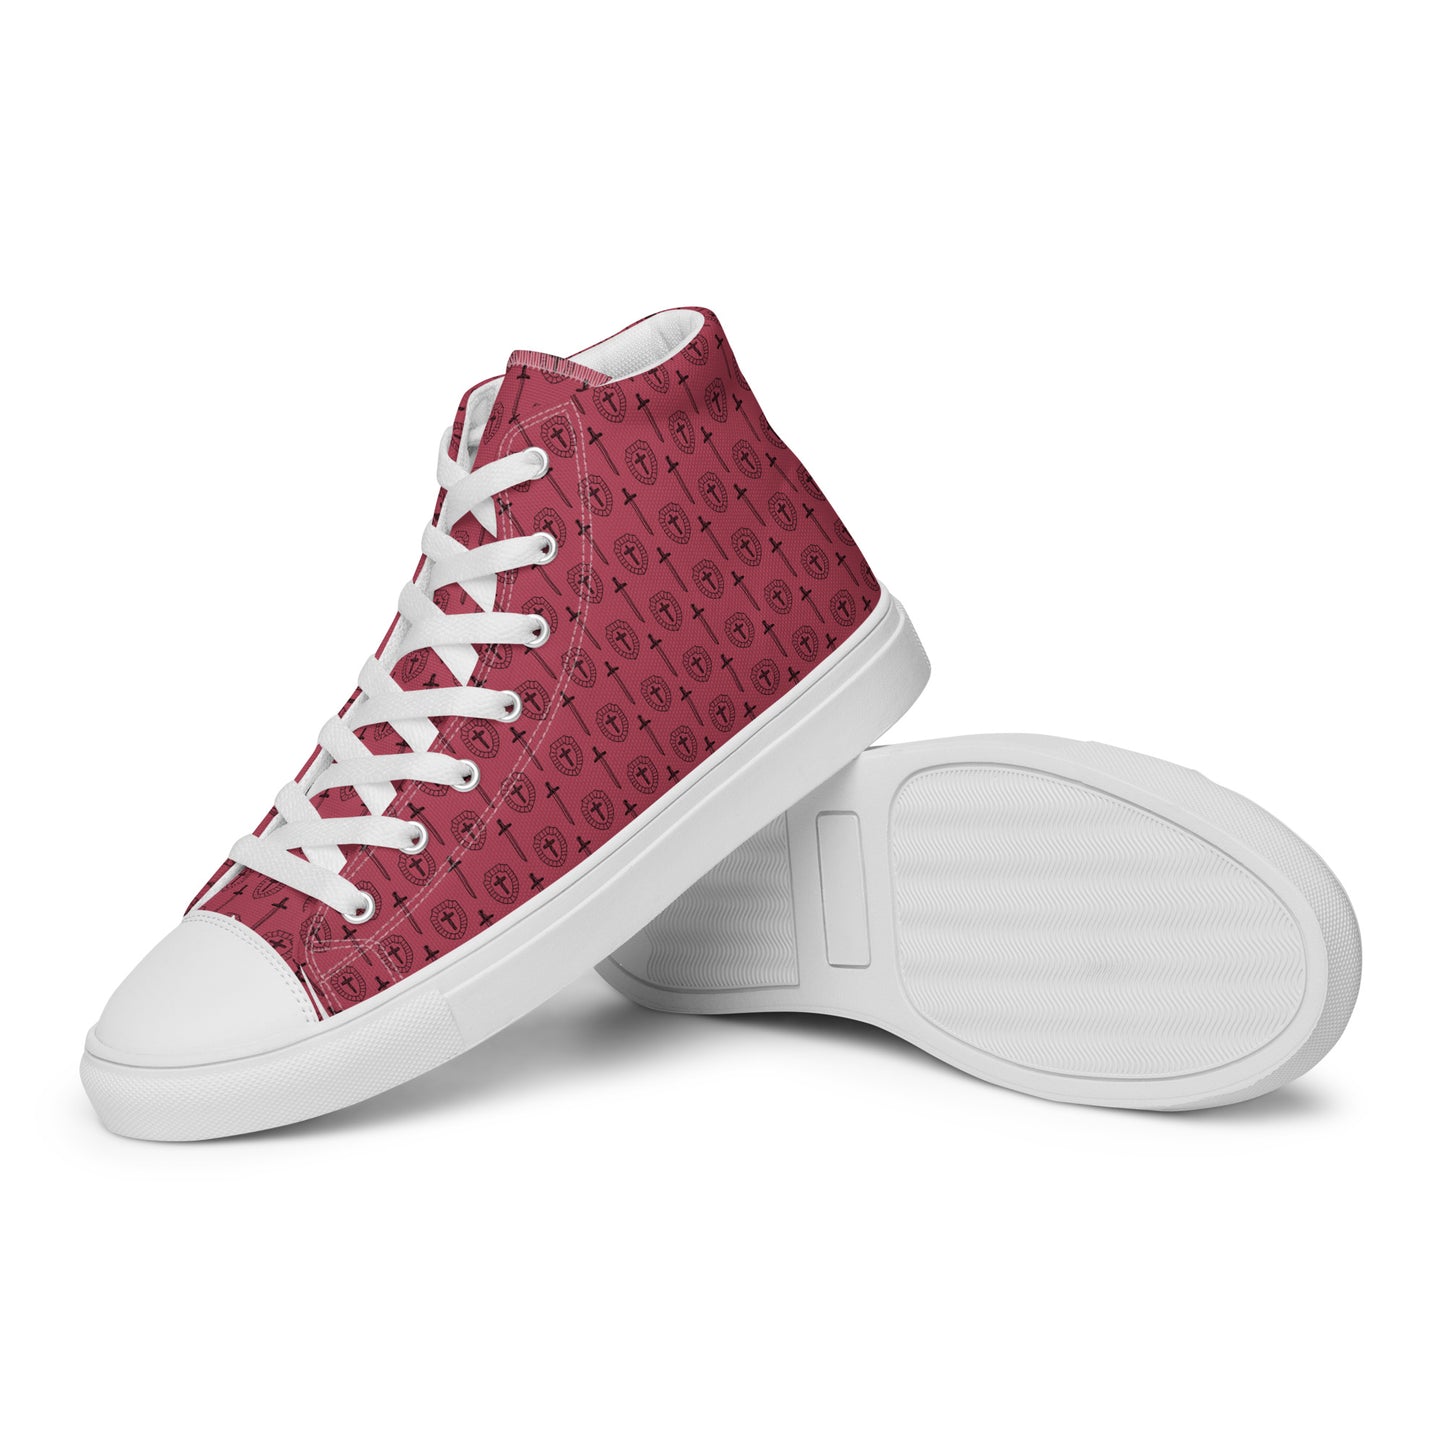 Walking with the Saints | St. Michael the Archangel—Women’s high top canvas shoes